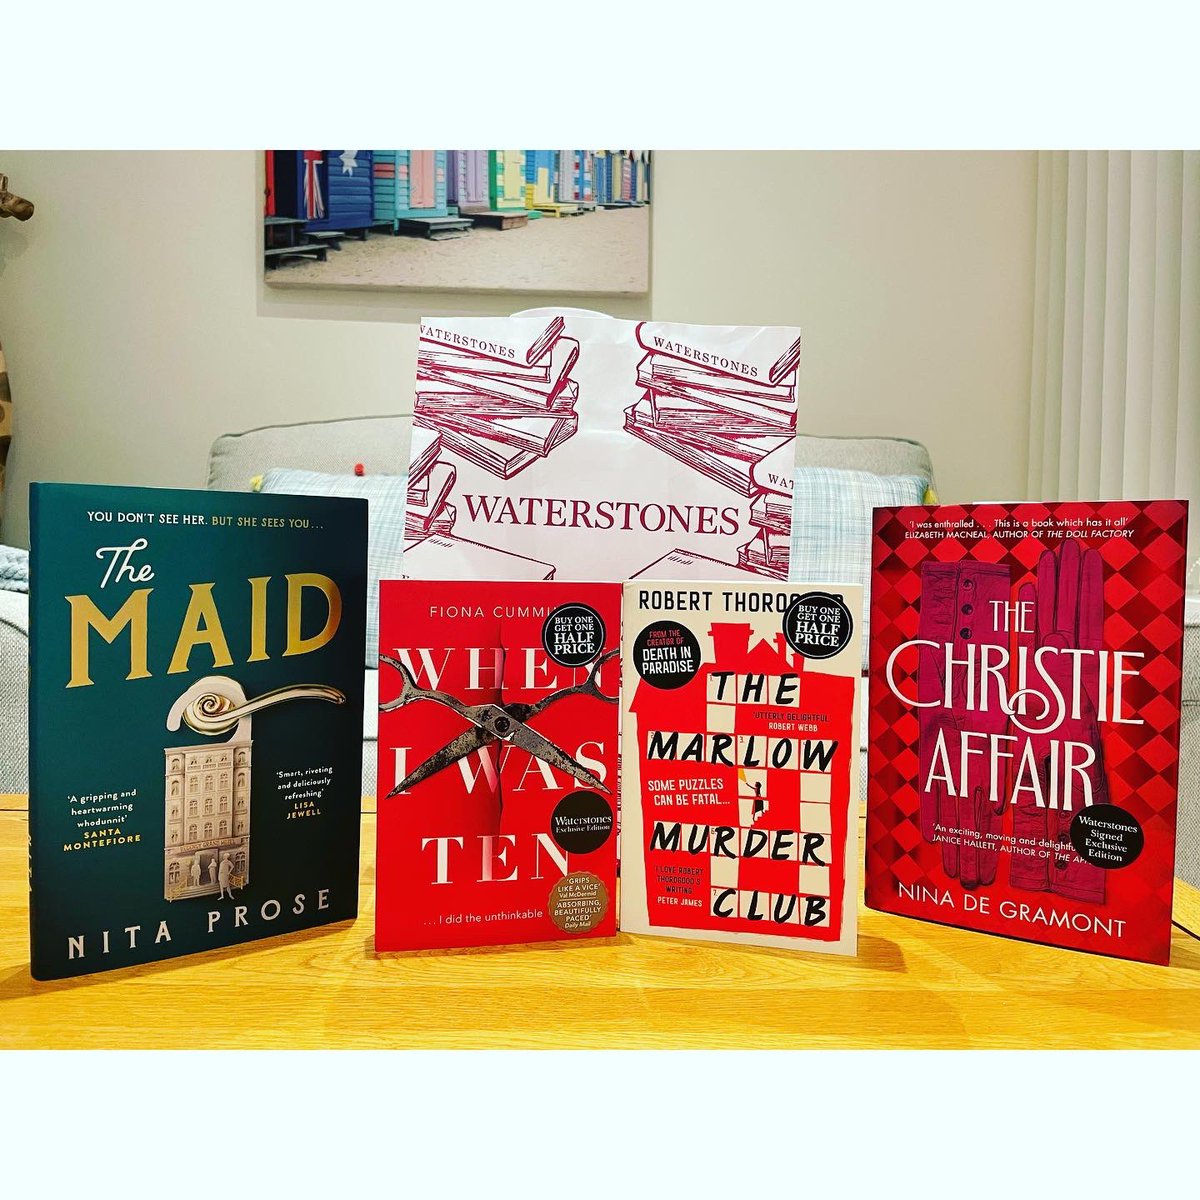 Look at those #spredges 😍 Picked up from @WaterstonesLPL ❤️📚

💚 #TheMaid by @NitaProse 
✂️ #WhenIWasTen by @FionaAnnCummins 
❤️ #TheMarlowMurderClub by @RobertThorogoo2 
🕵️‍♀️ #TheChristieAffair by @NinadeGramont 

#booktwt Which one should I delve into first?